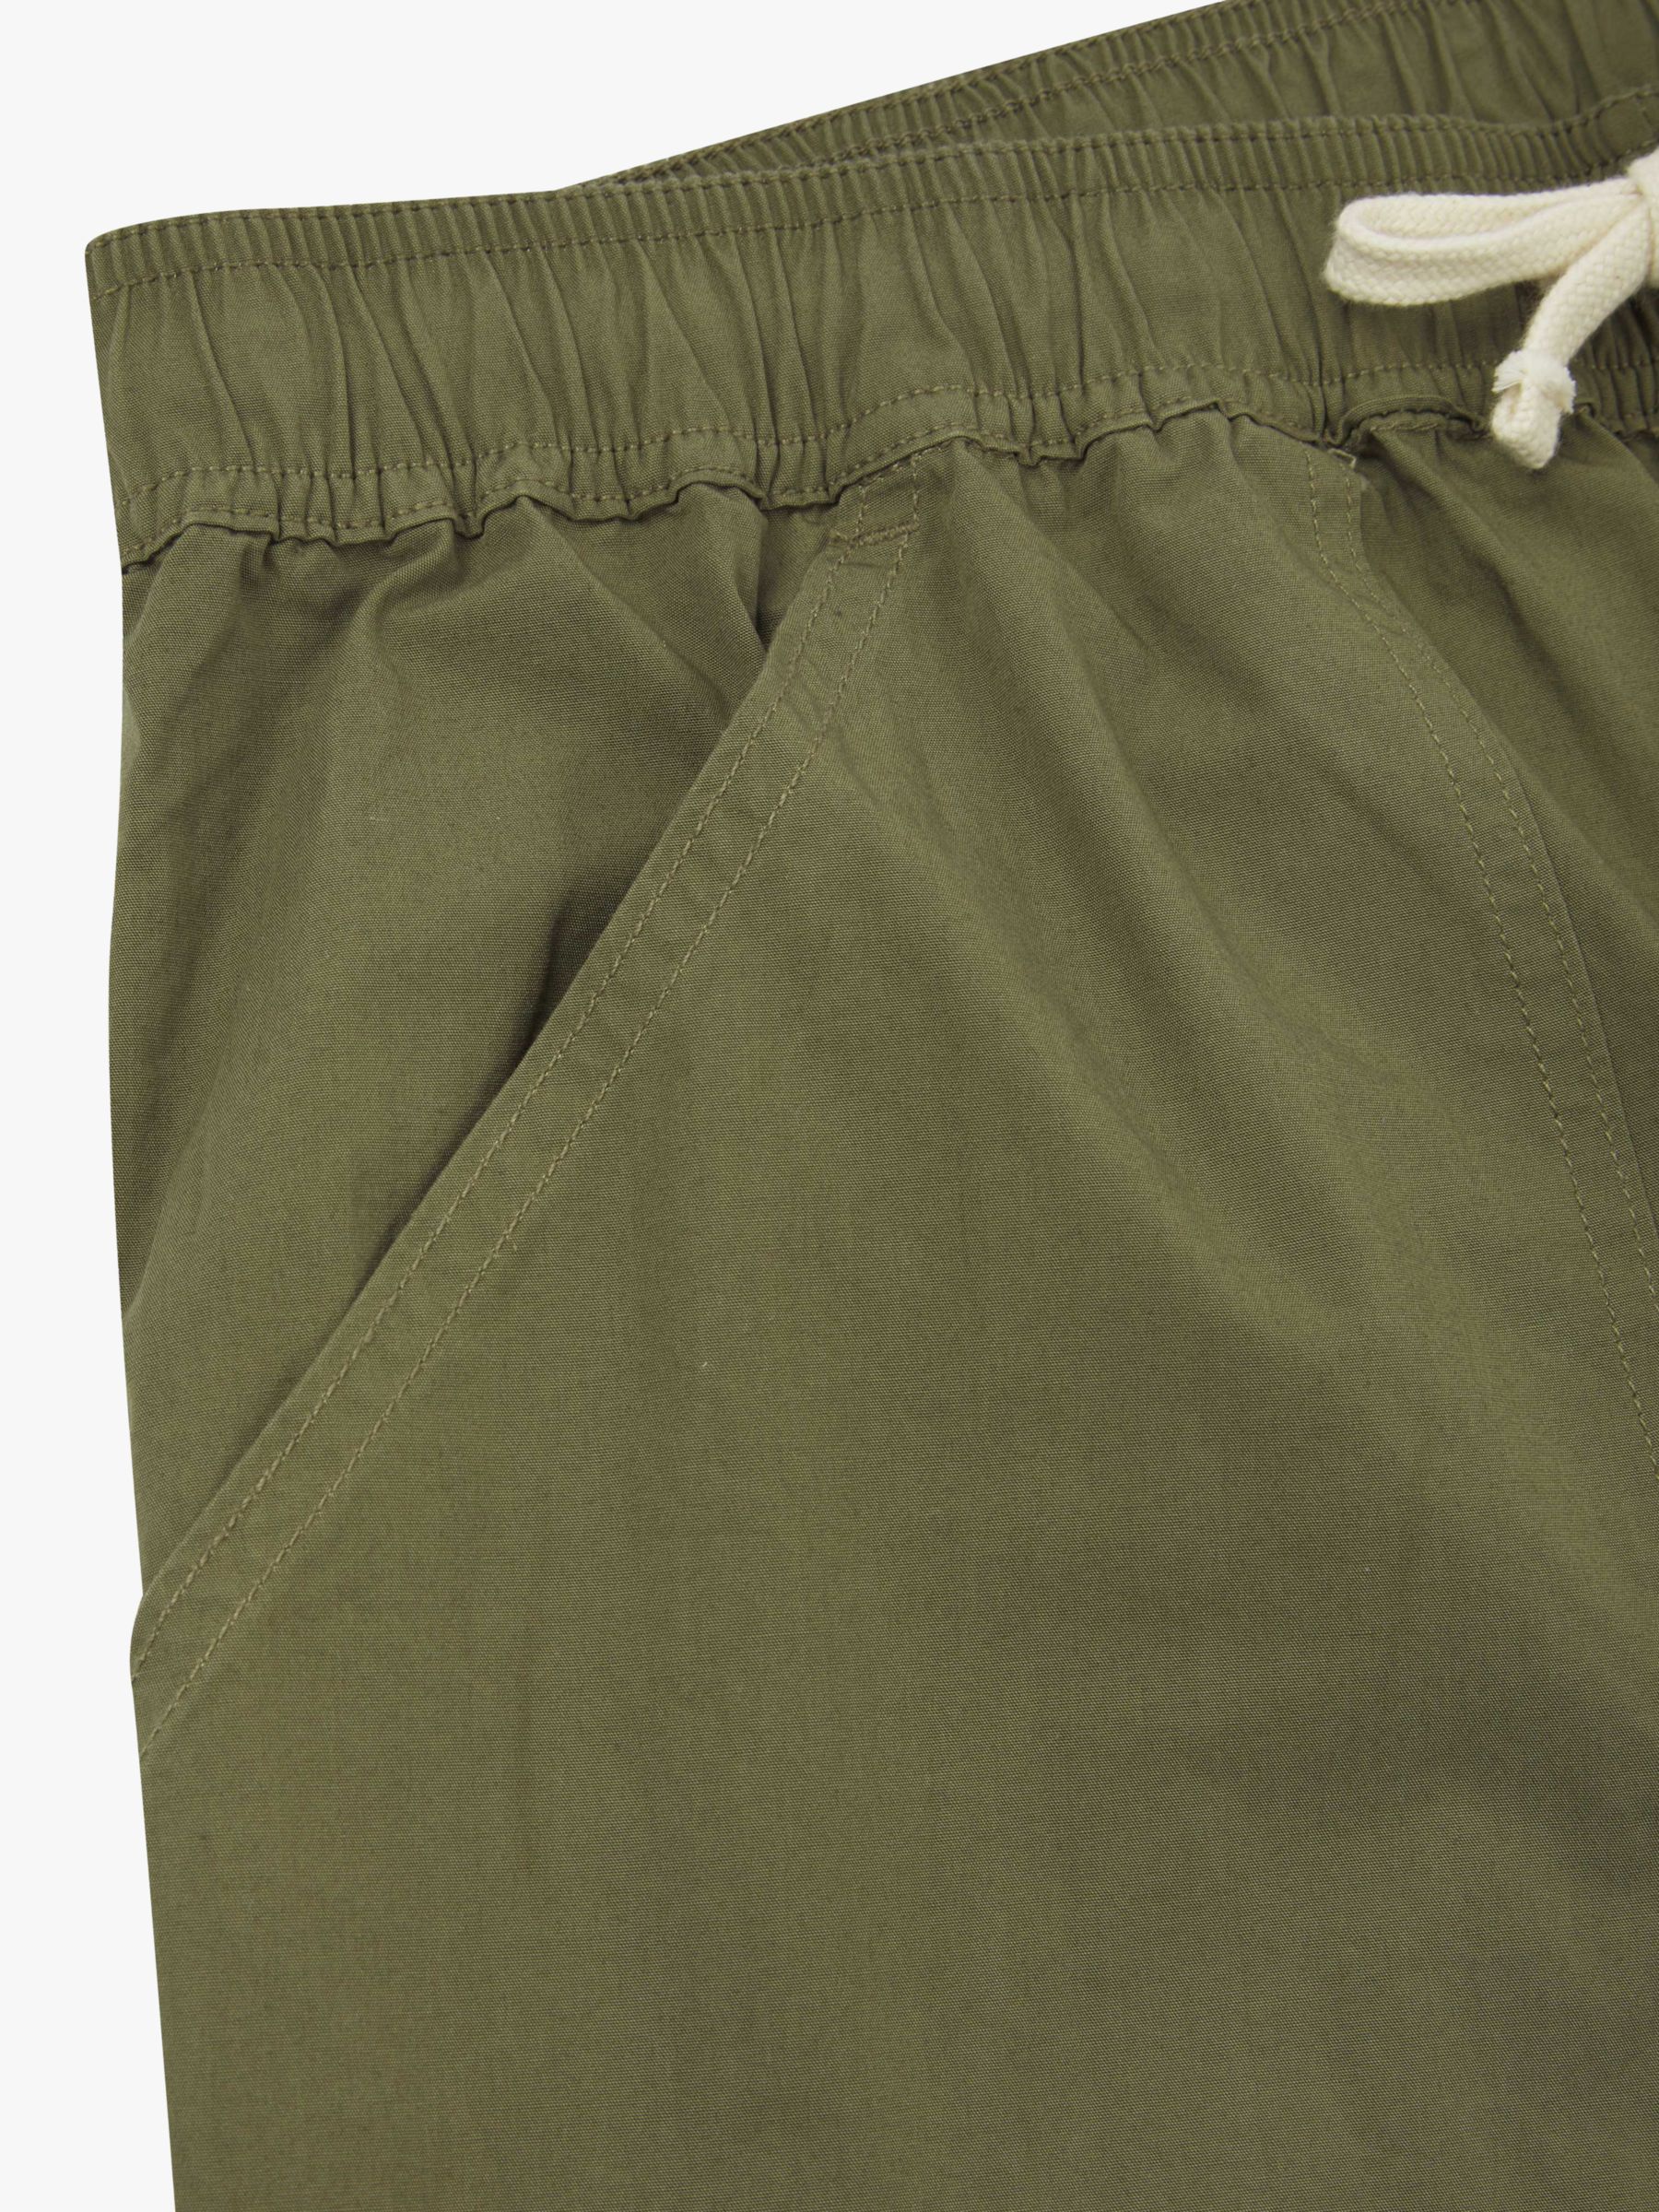 Uskees Lightweight Trousers, Olive, 34R